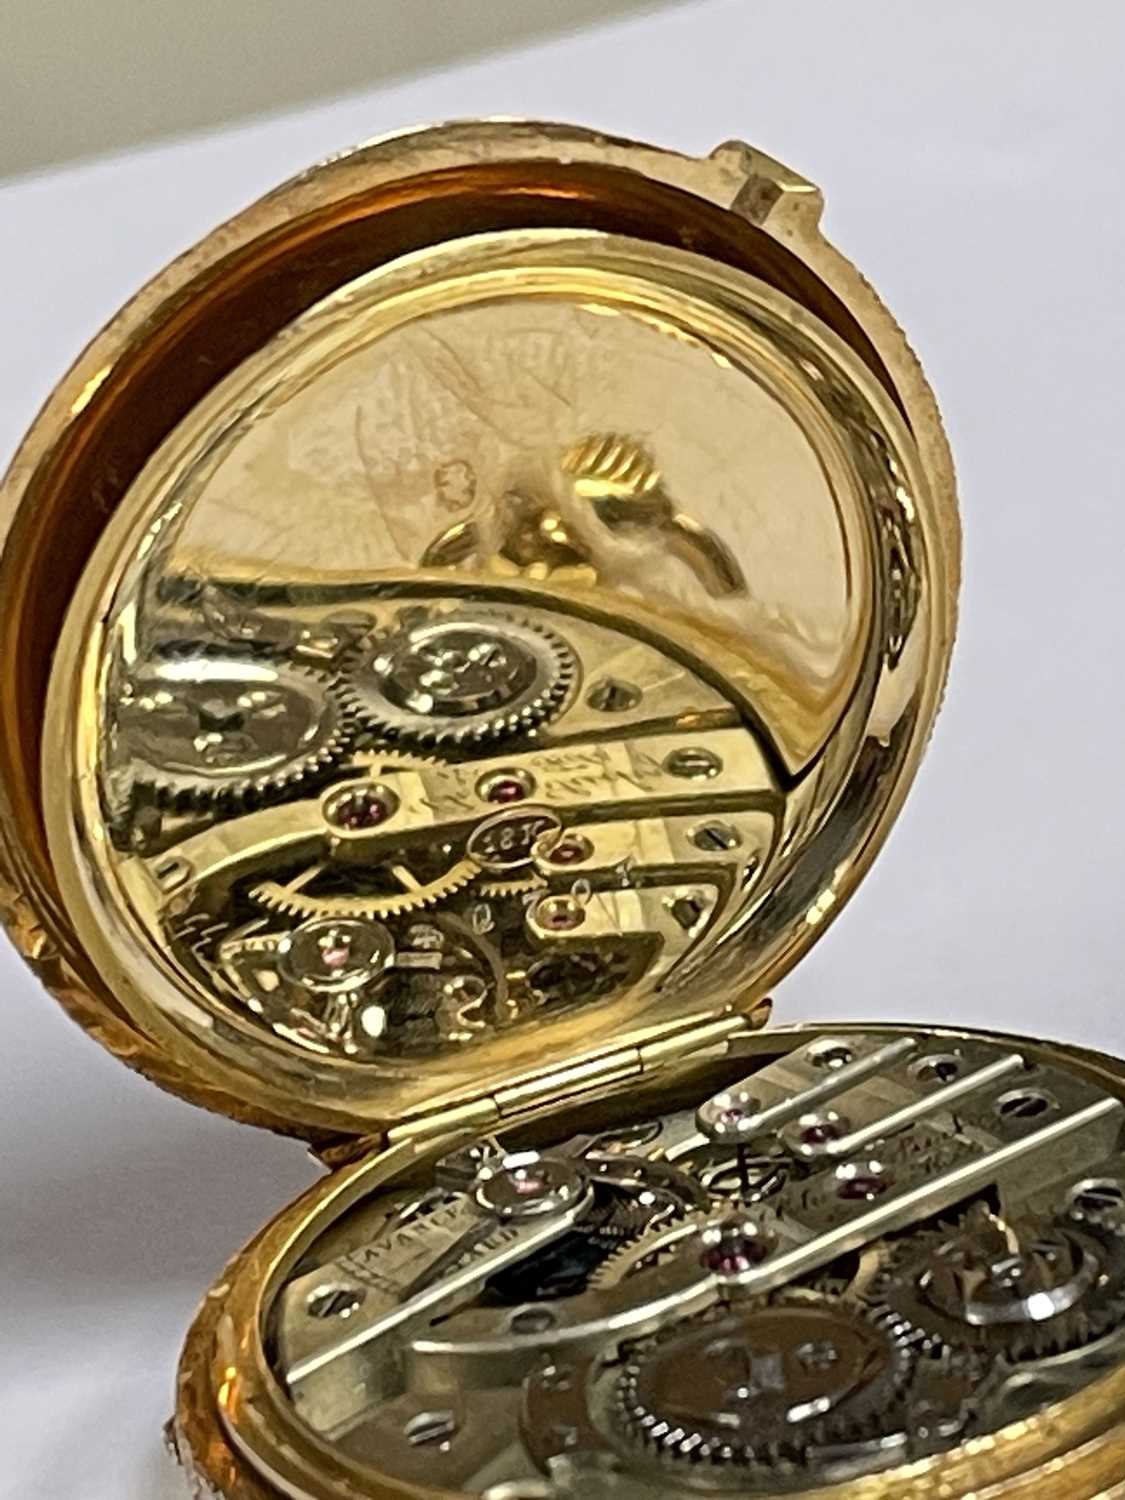 CHARLES SUCHY & FILS 18K GOLD & BLACK ENAMEL FOB WATCH, the full hunter case set with rose-cut - Image 14 of 14